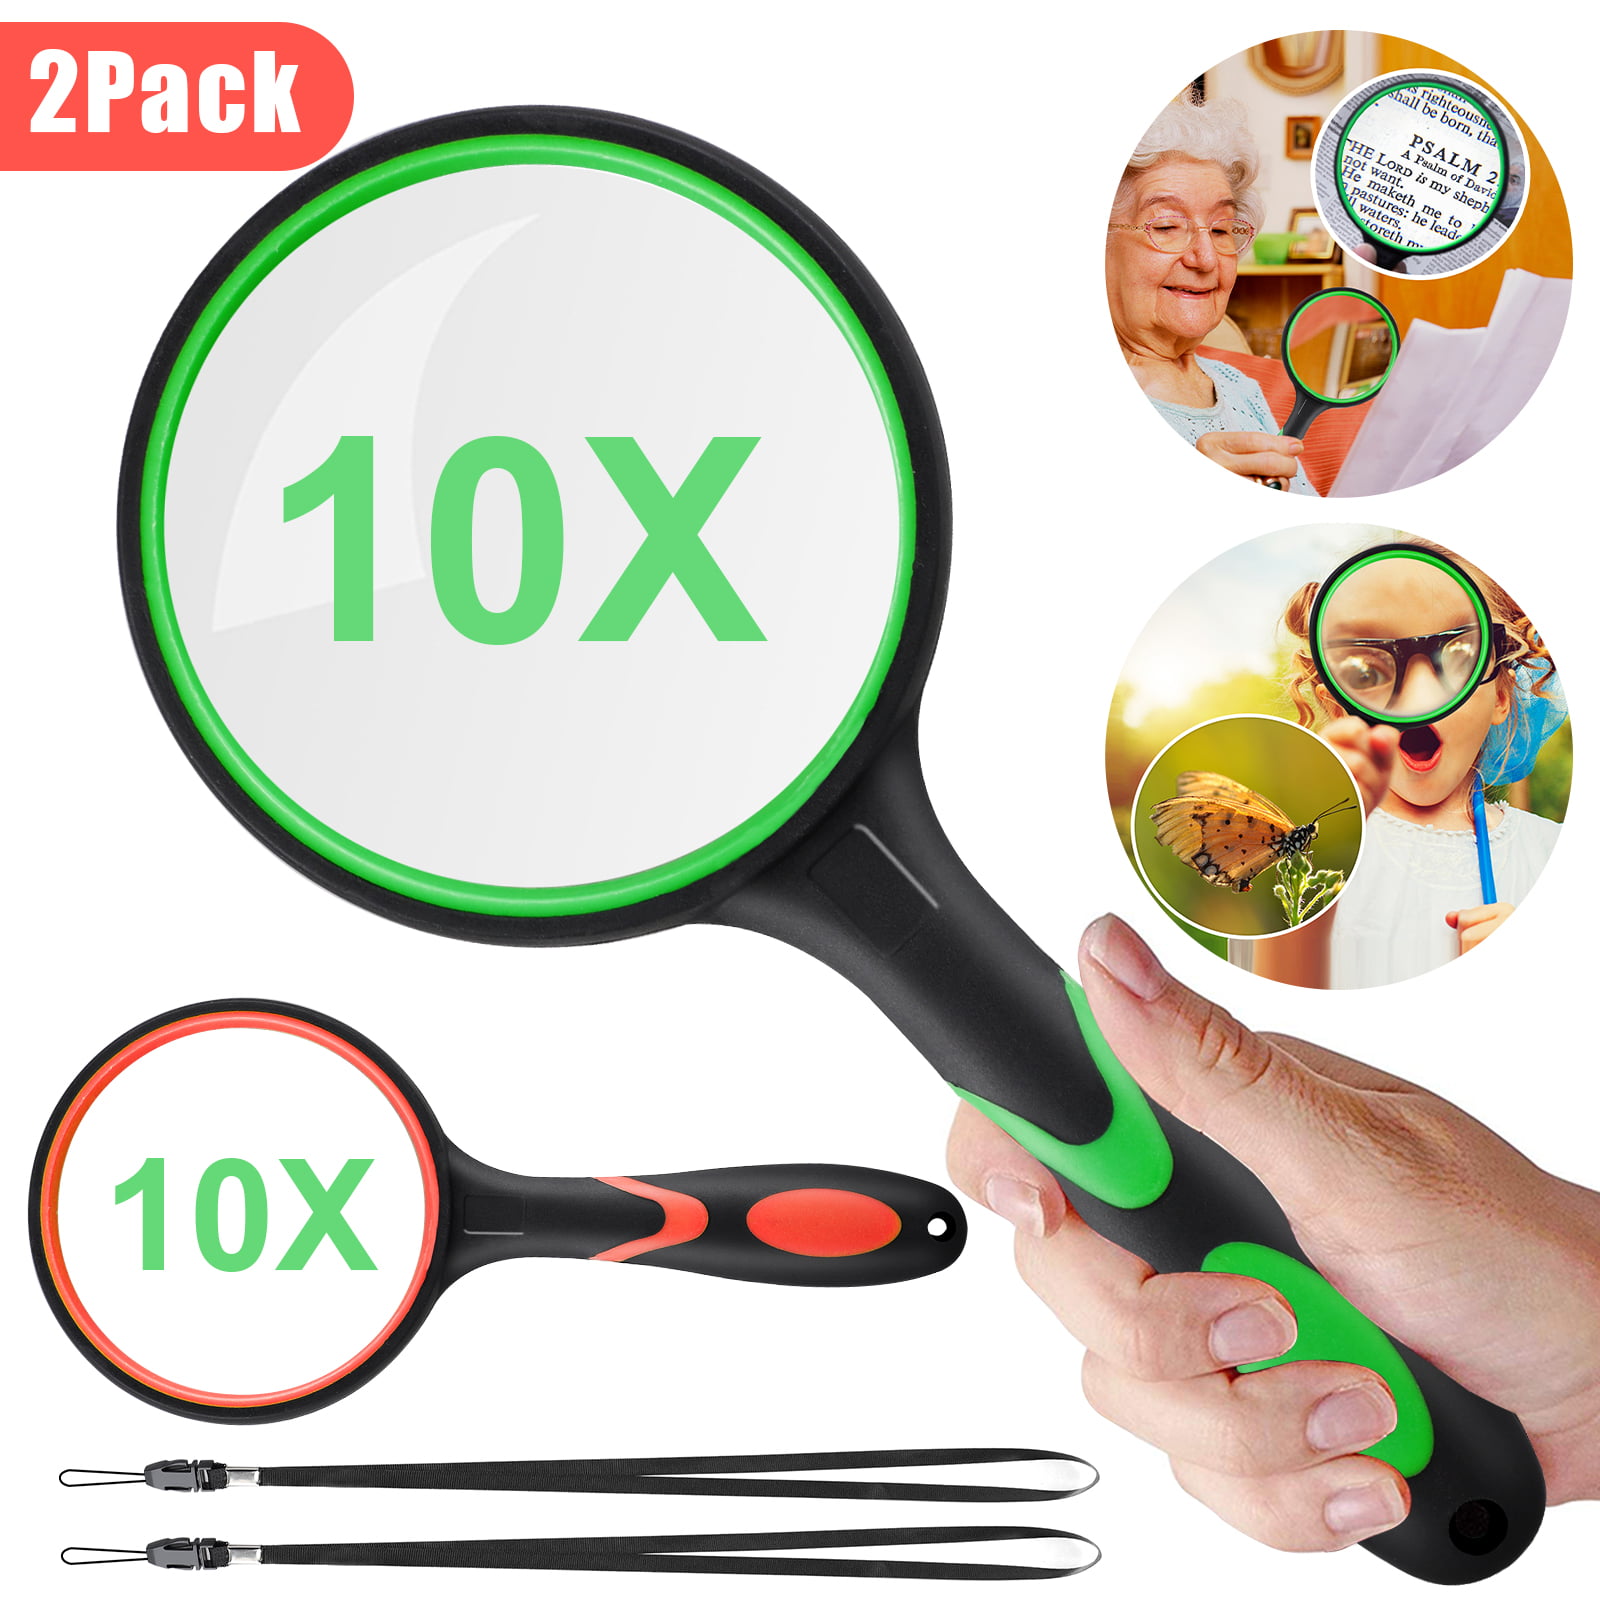 I-WILL Magnifying Glass 10X 75mm Magnifying Lens with Non-Slip Soft Rubber Handle Magnification Handheld Shatterproof Mirror Magnifier Glasses for Reading Books Inspection Insects Hobbies Crafts 2pcs